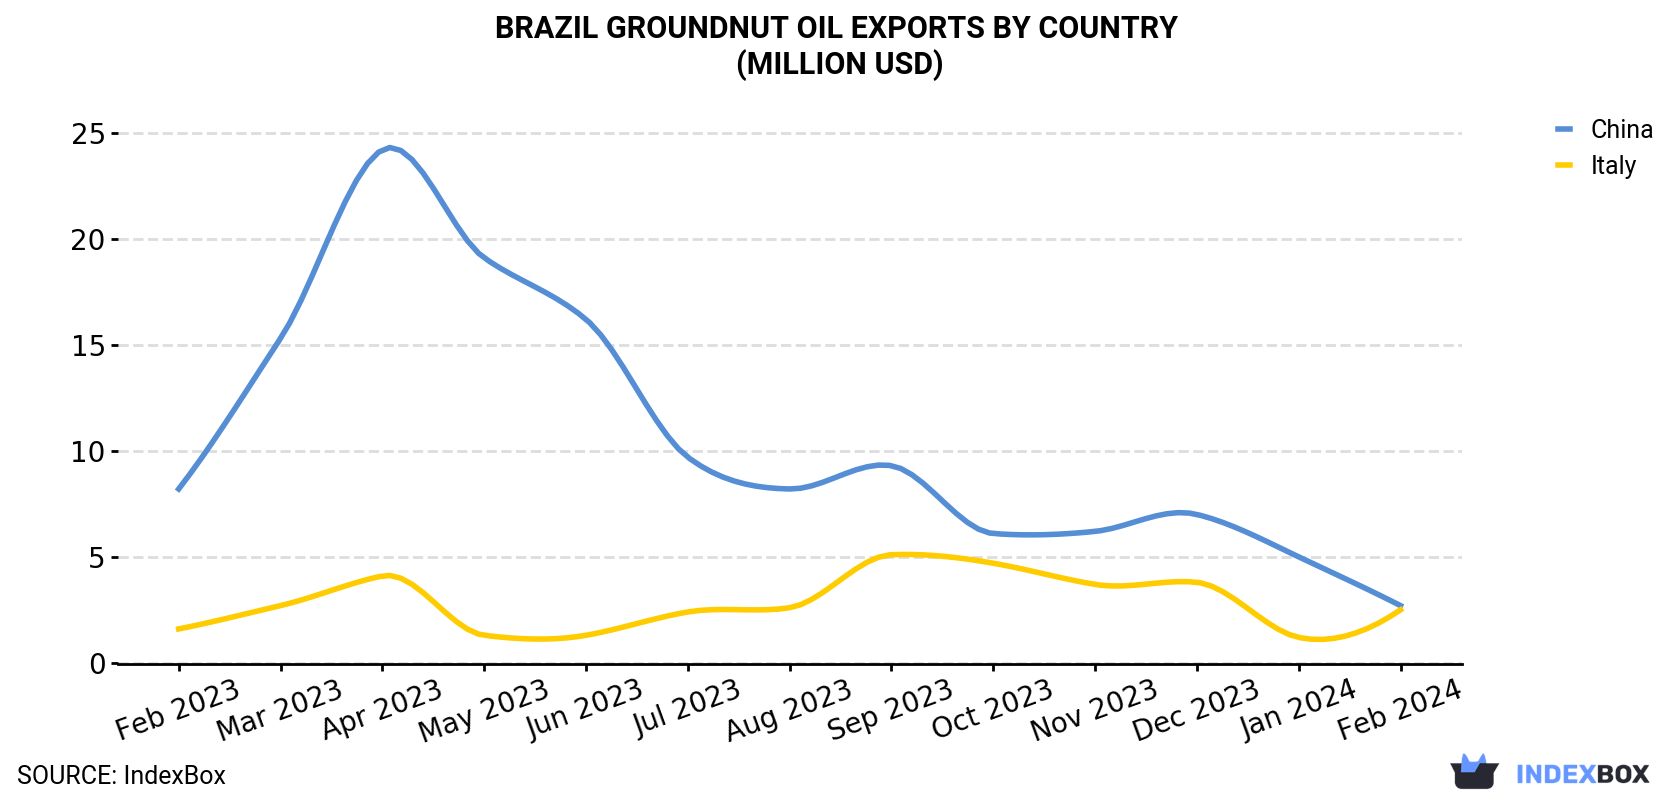 Brazil Groundnut Oil Exports By Country (Million USD)